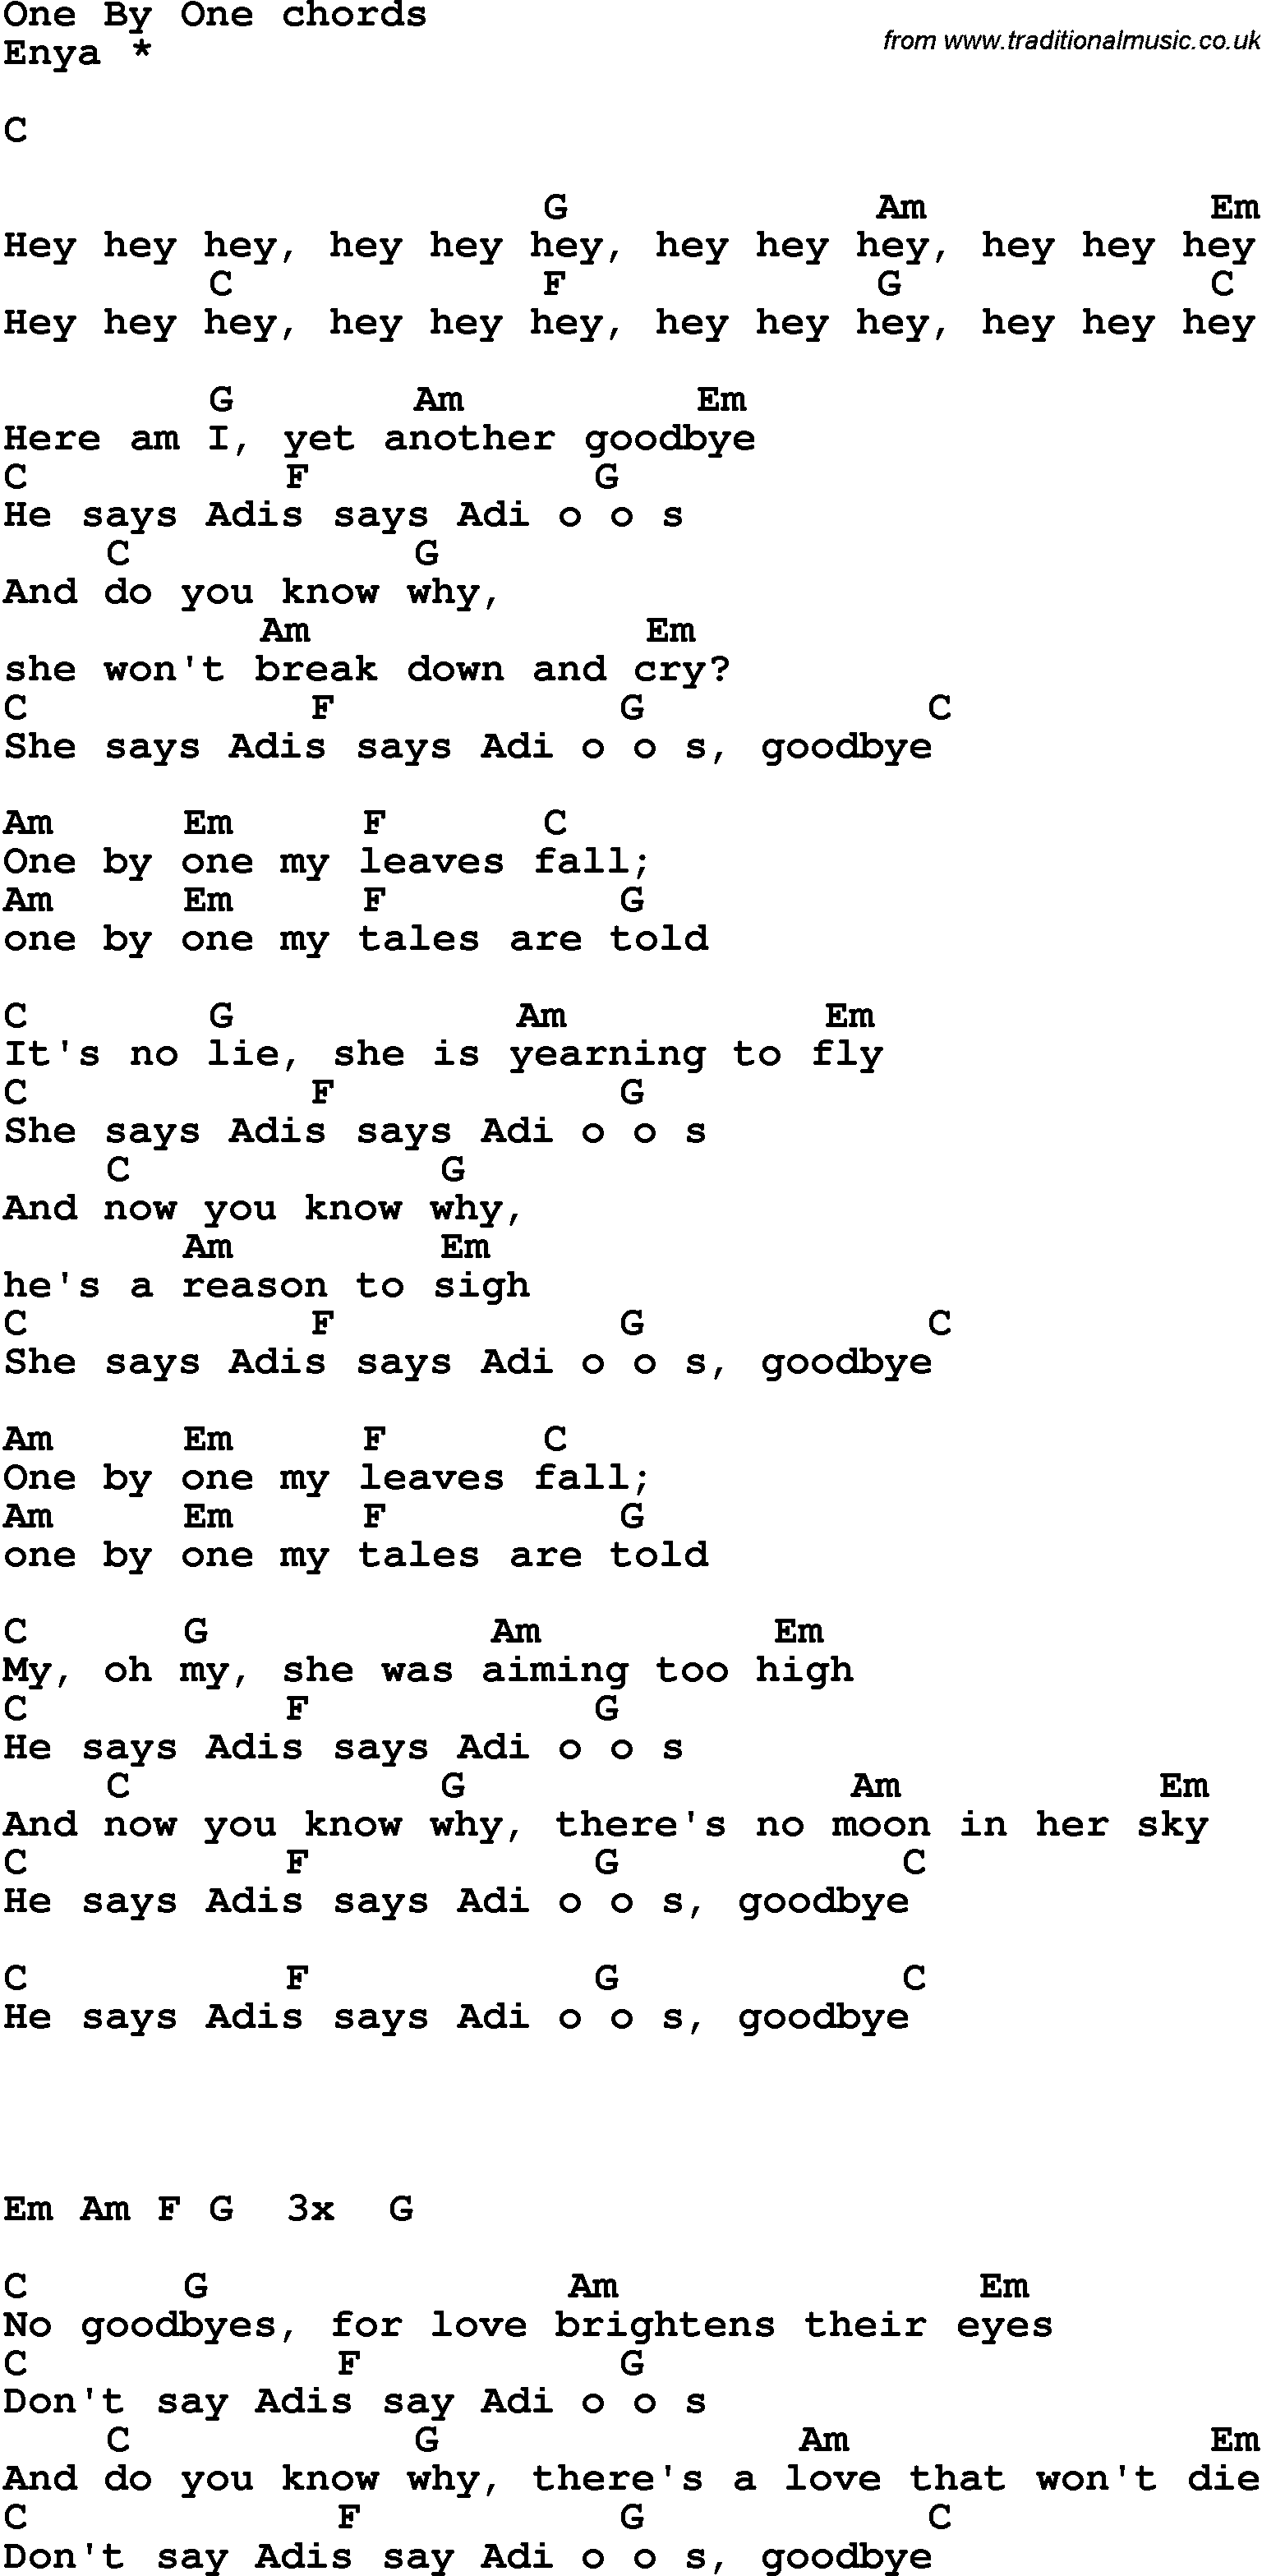 Song Lyrics with guitar chords for One By One